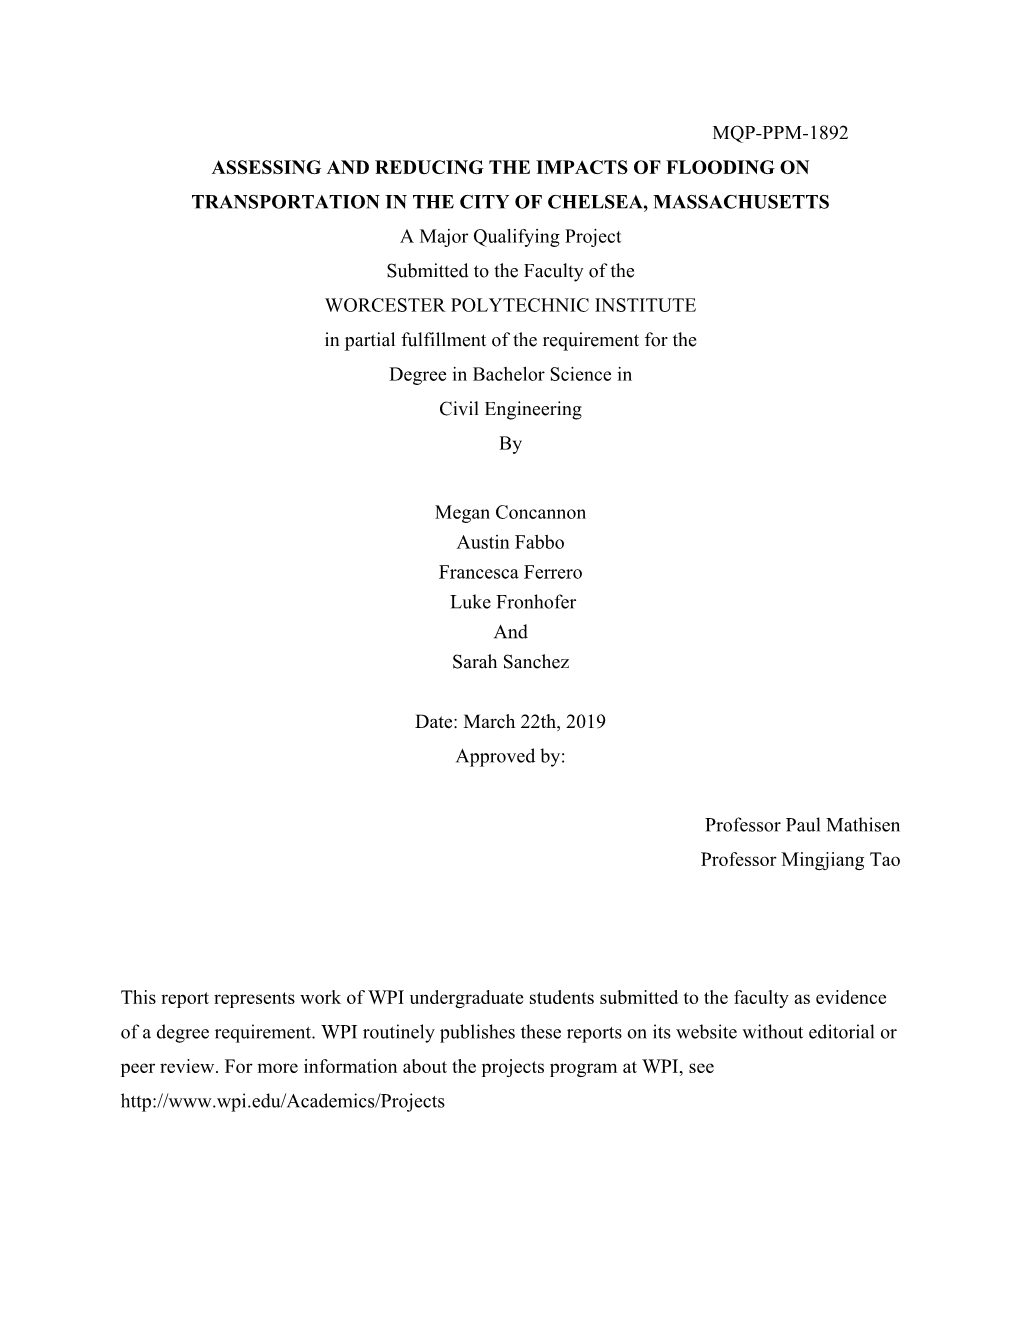 MQP-PPM-1892 ASSESSING and REDUCING the IMPACTS of FLOODING on TRANSPORTATION in the CITY of CHELSEA, MASSACHUSETTS a Major Qual